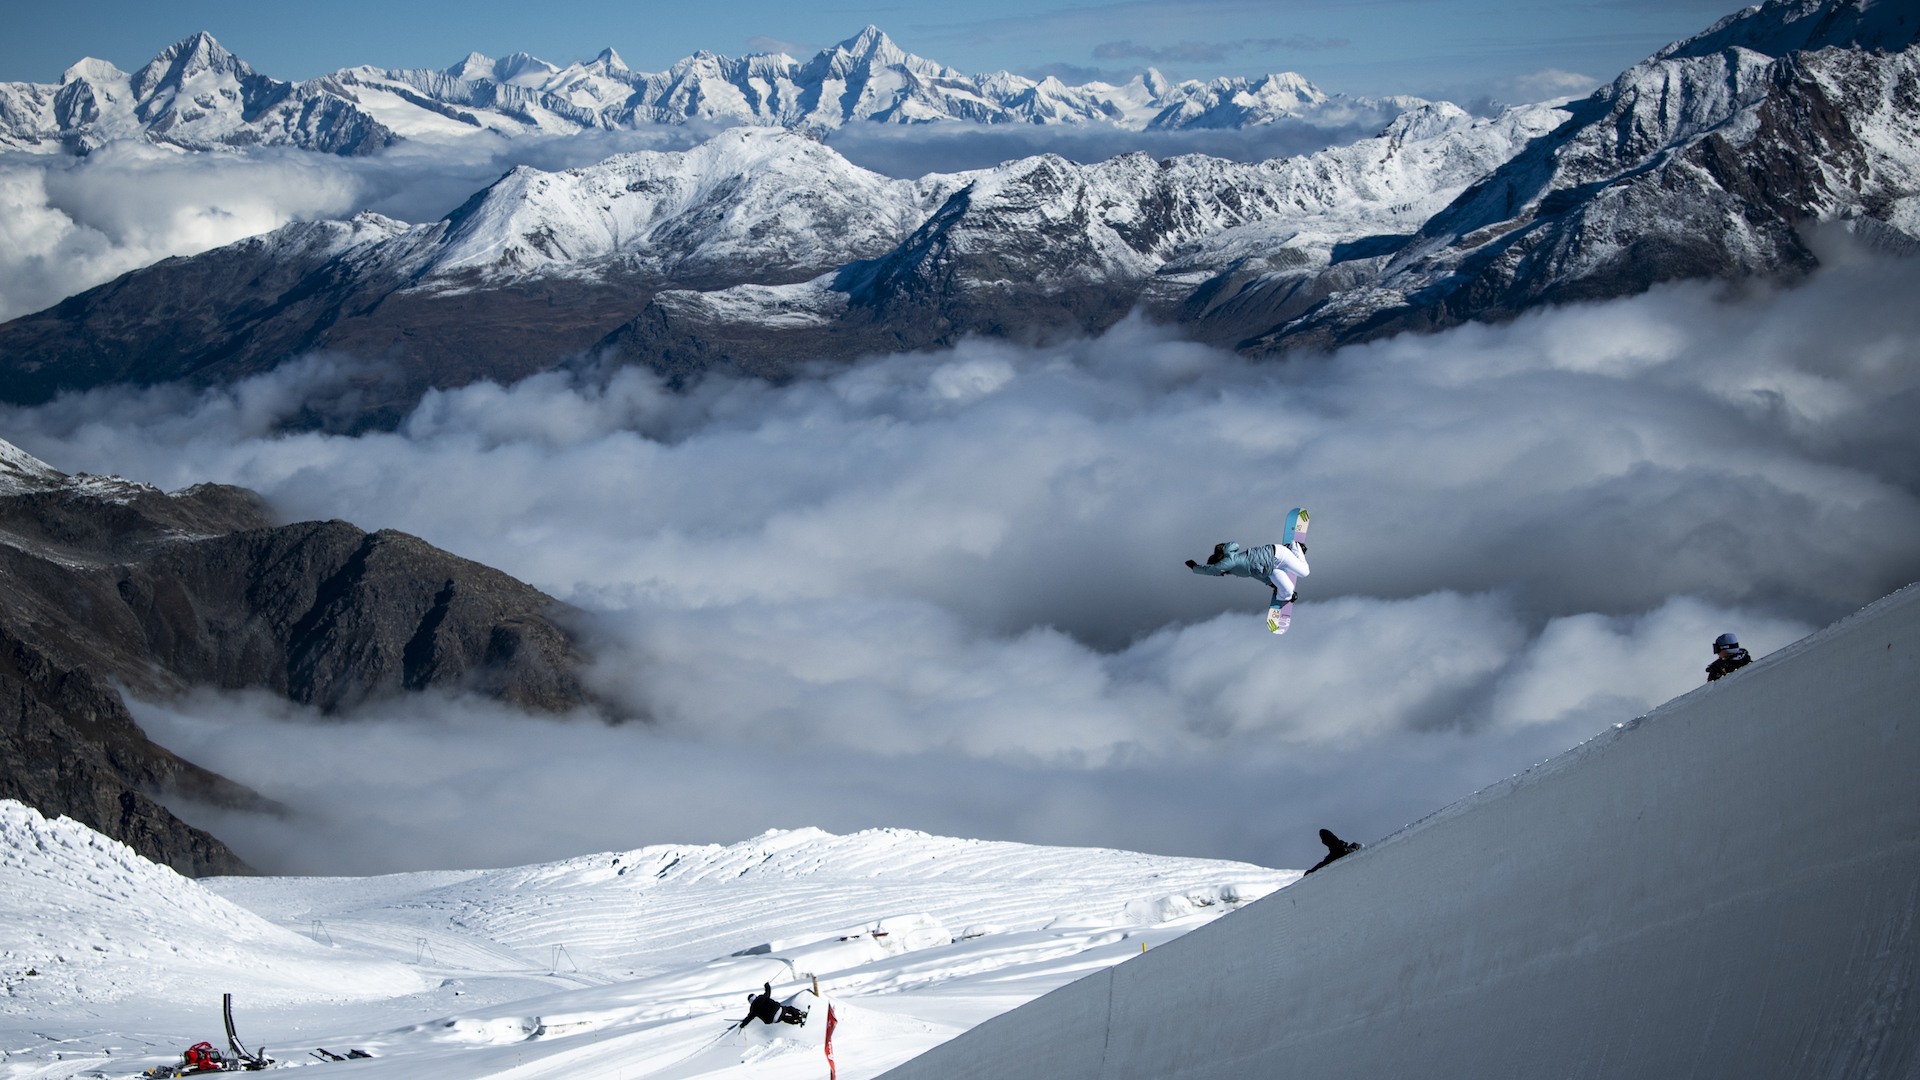 A snowboarder airs out of the halfpipe in Saas Fee. 